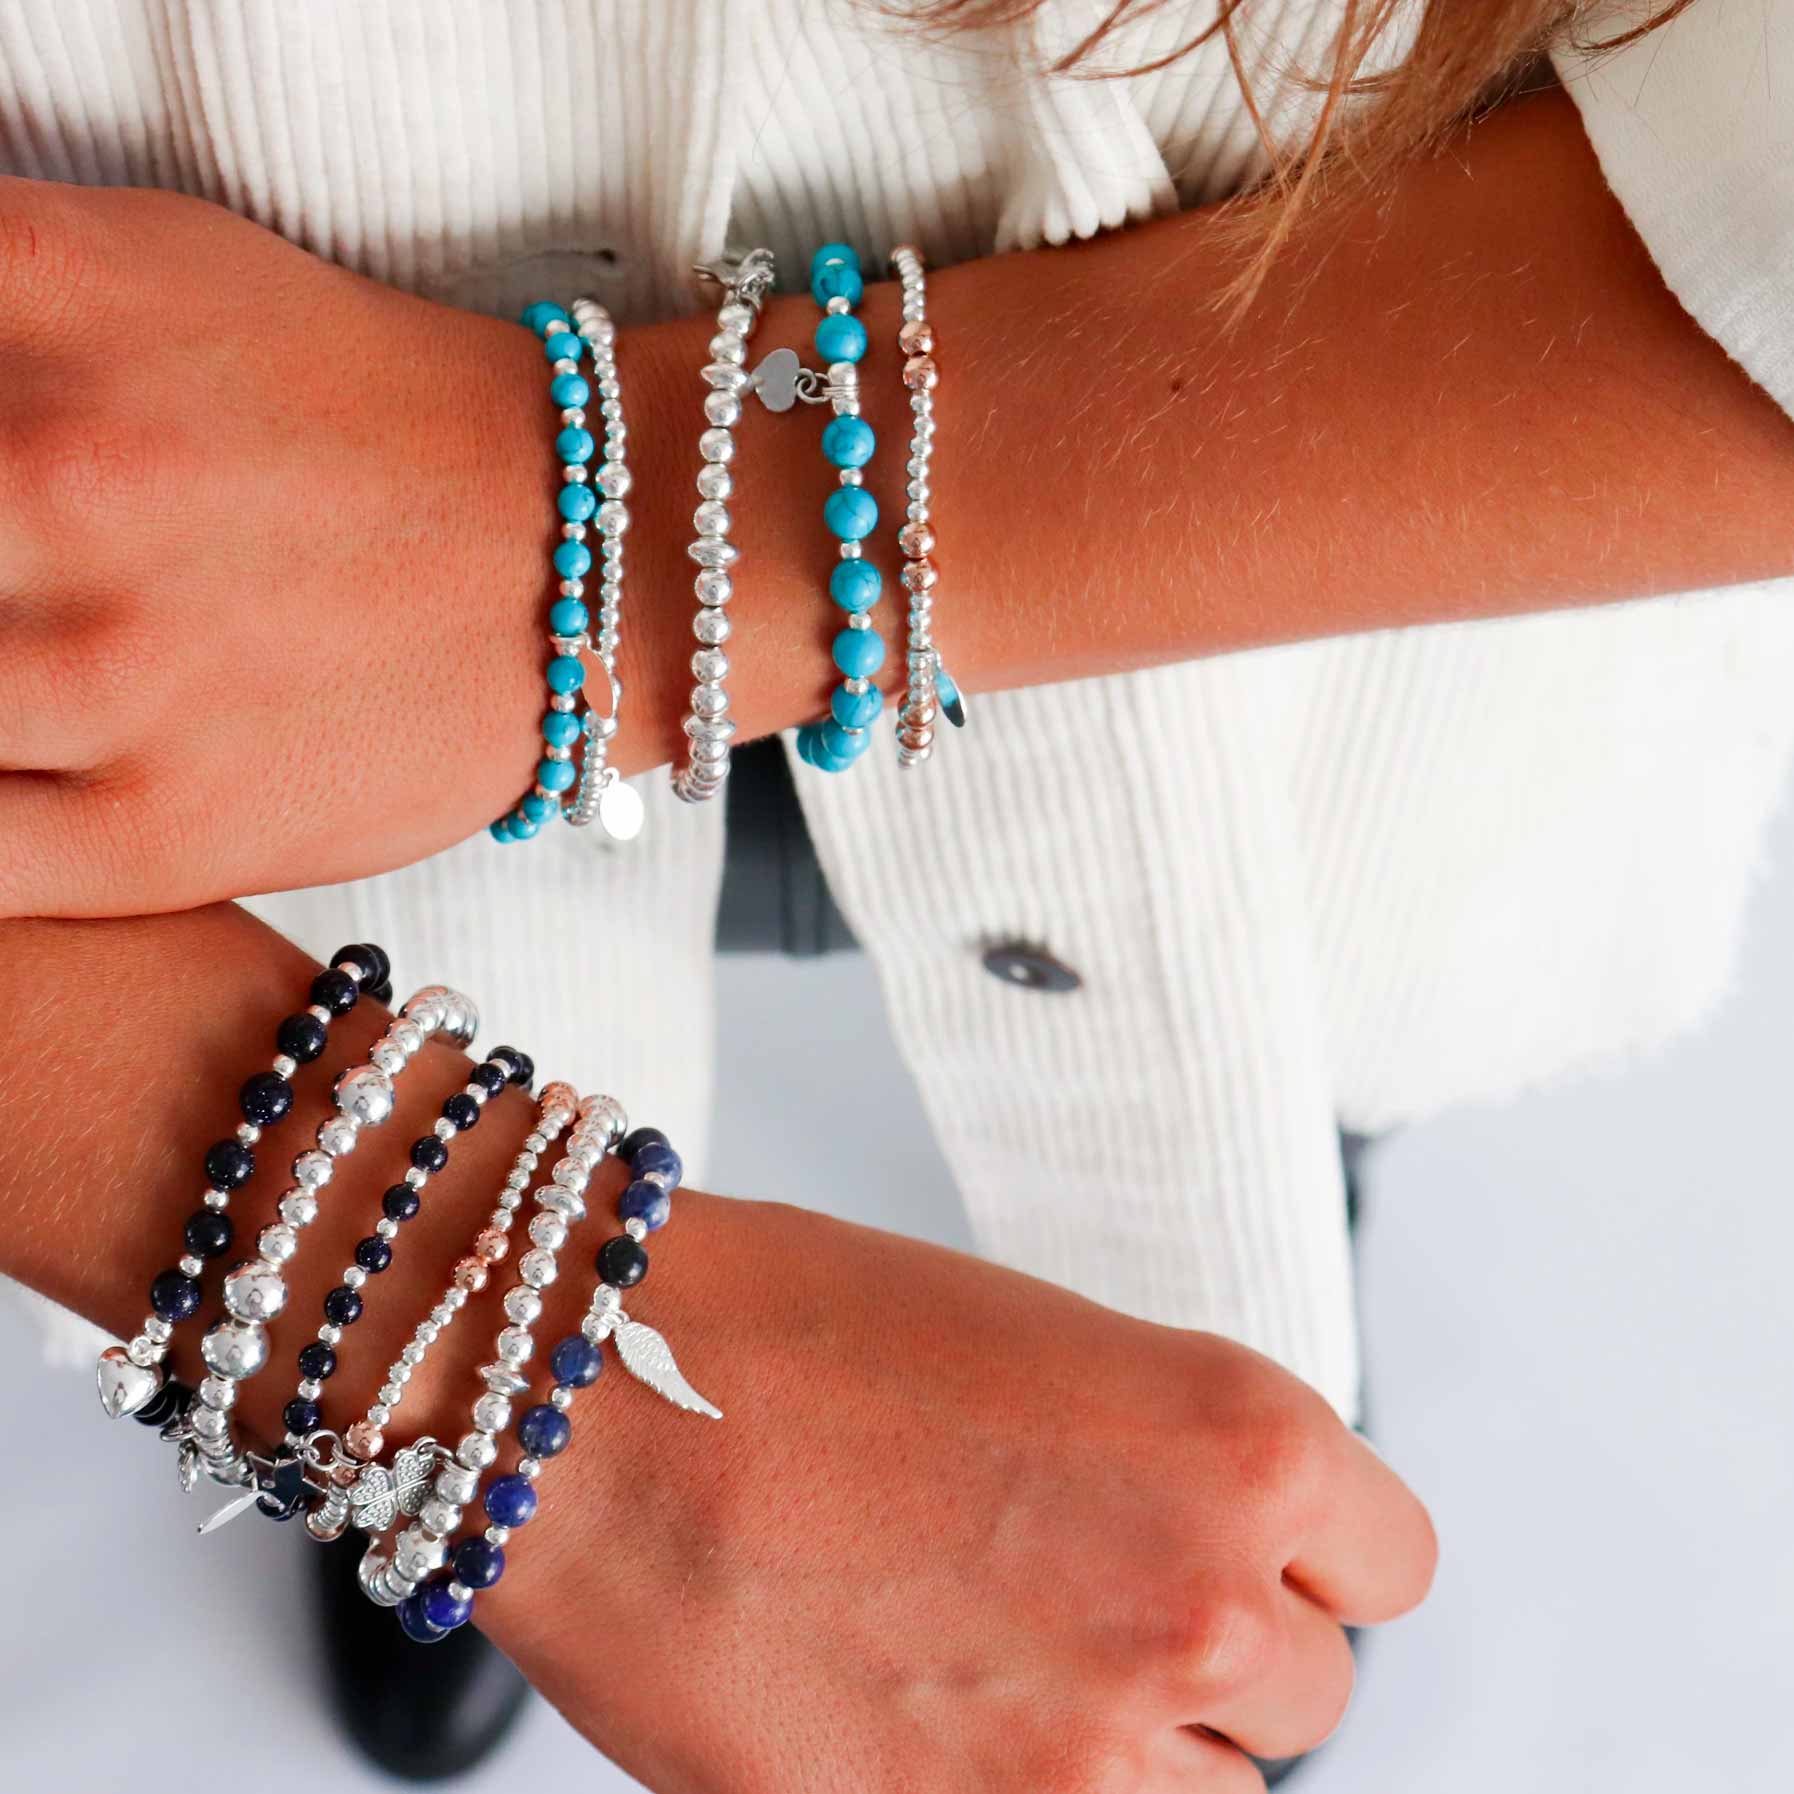 How to Wear Silver Stacking Bracelets to Any Occasion